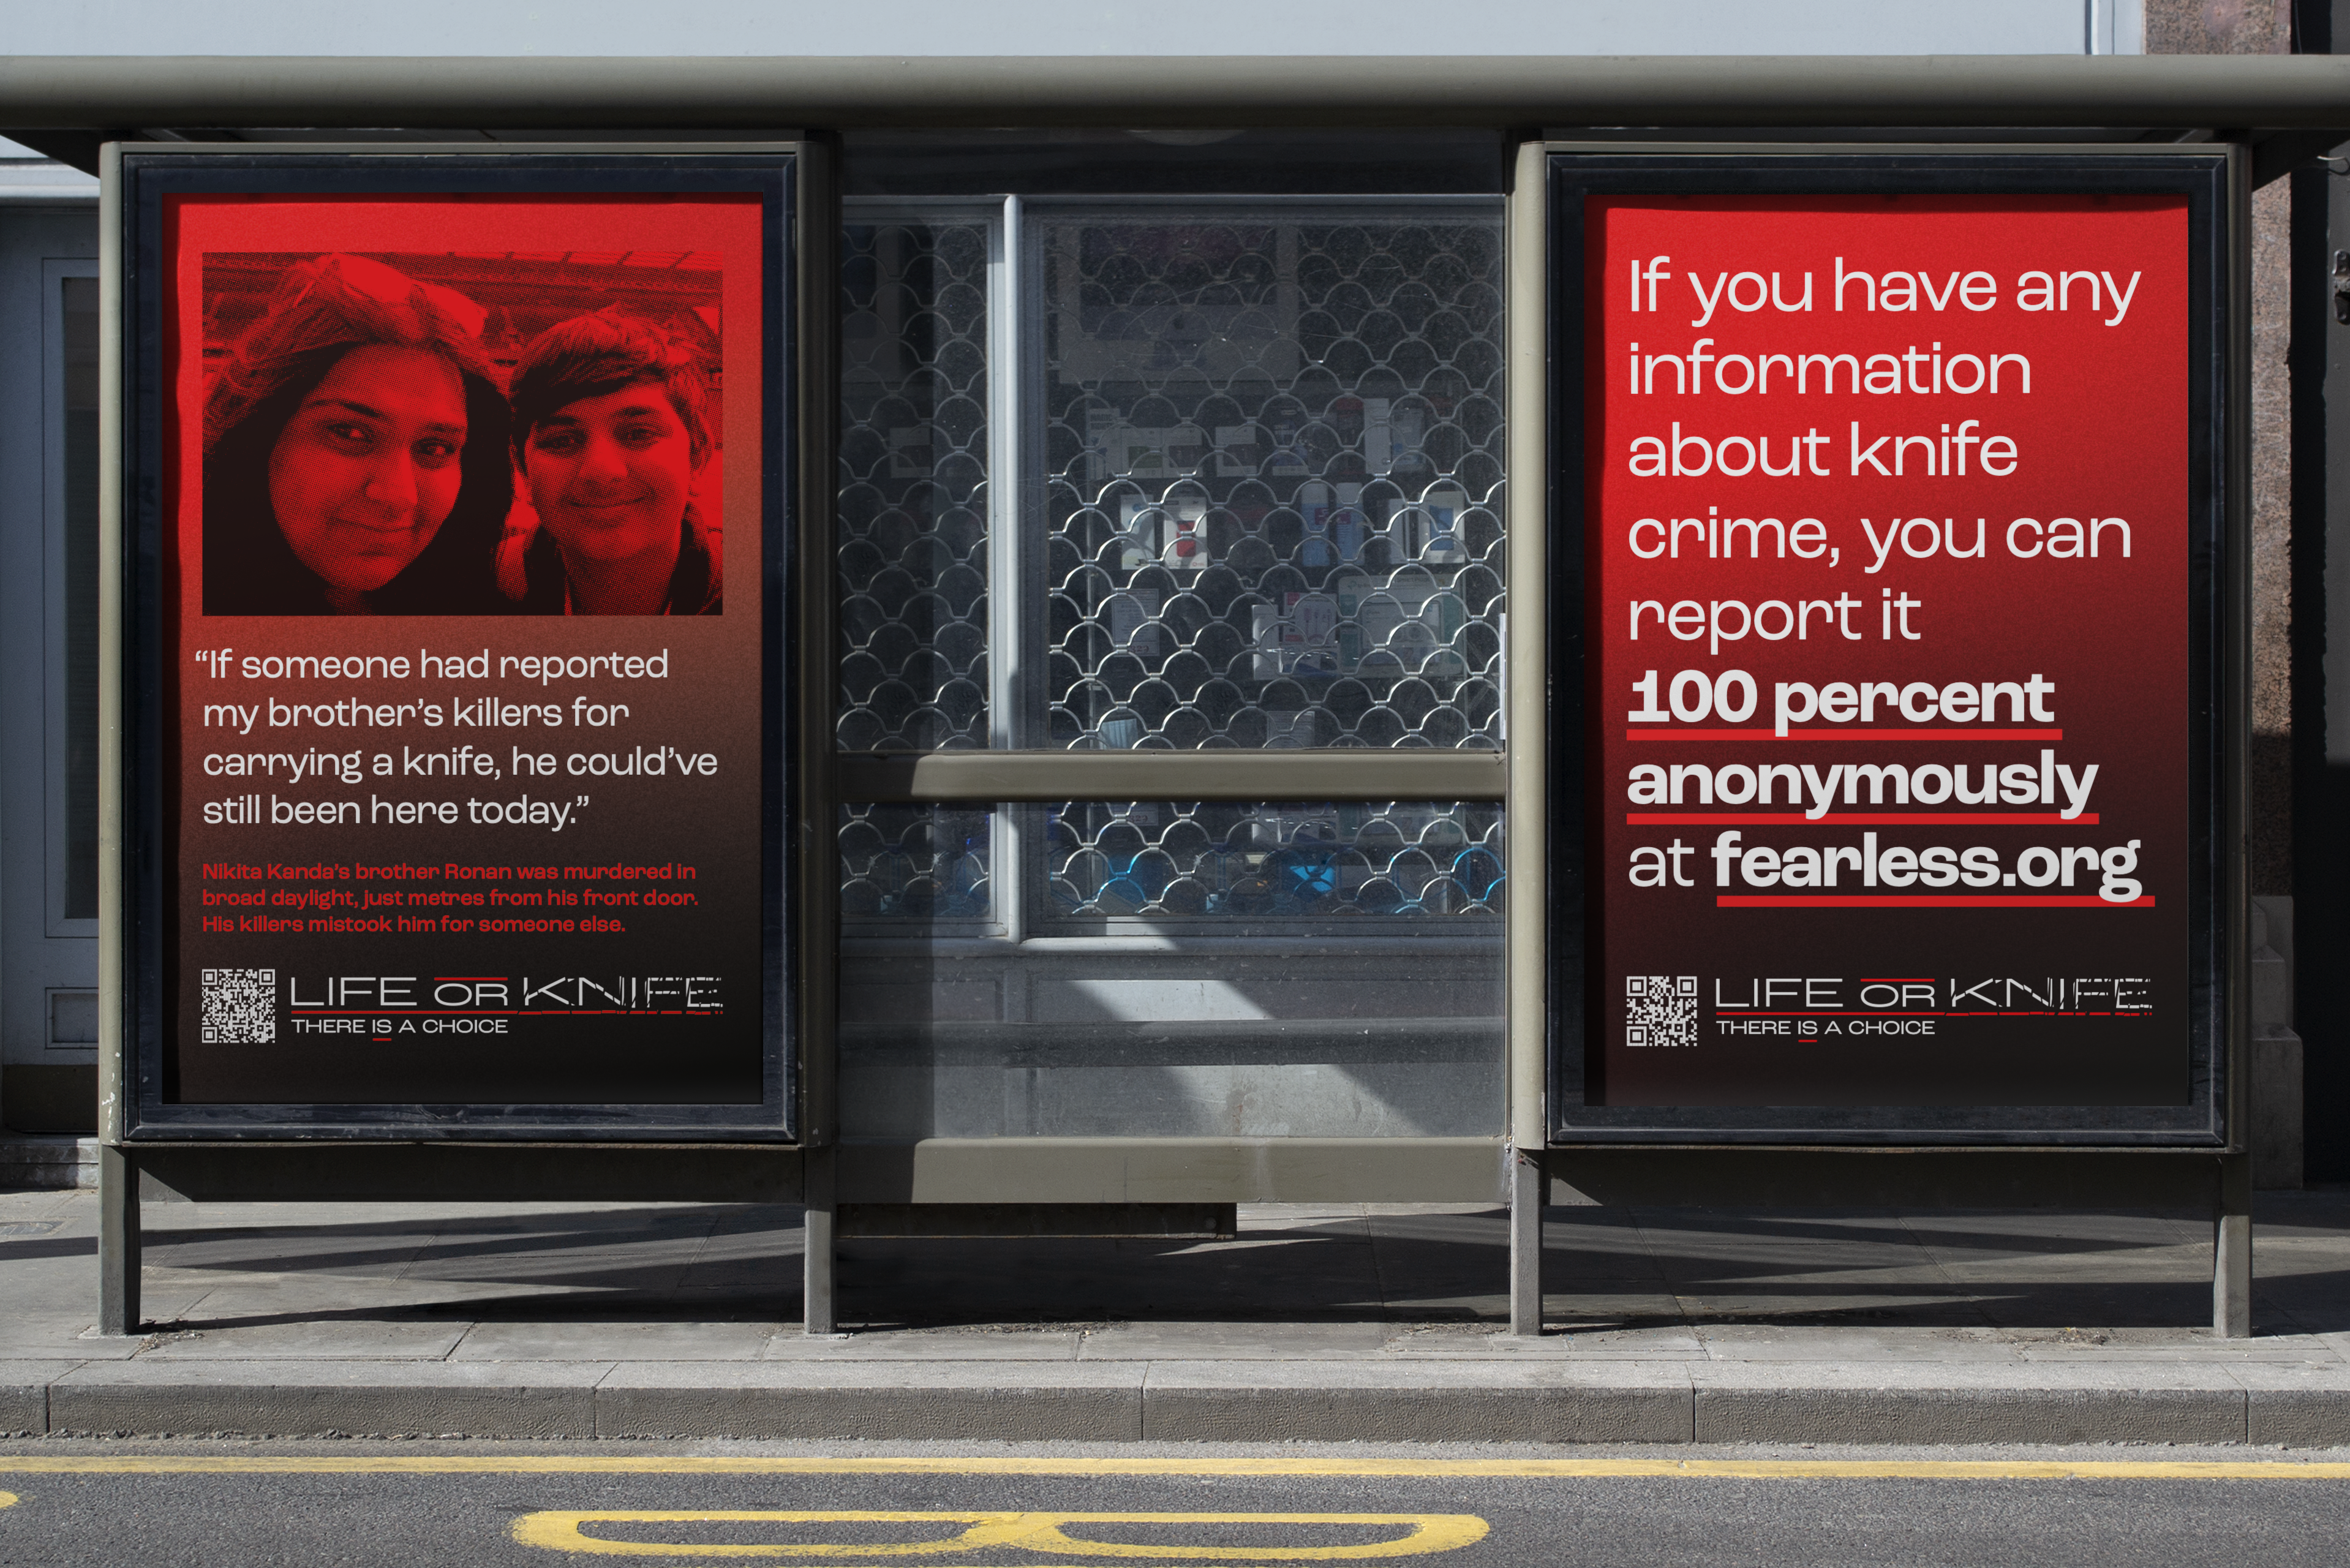 Image of a bus shelter featuring two Life or Knife branded posters. The left-hand poster features a picture of Nikita and Ronan Kanda, along with a quote from Nikita. The right hand poster has large text reading 'If you have any information about knife crime you can report it 100% anonymously at fearless.org.'